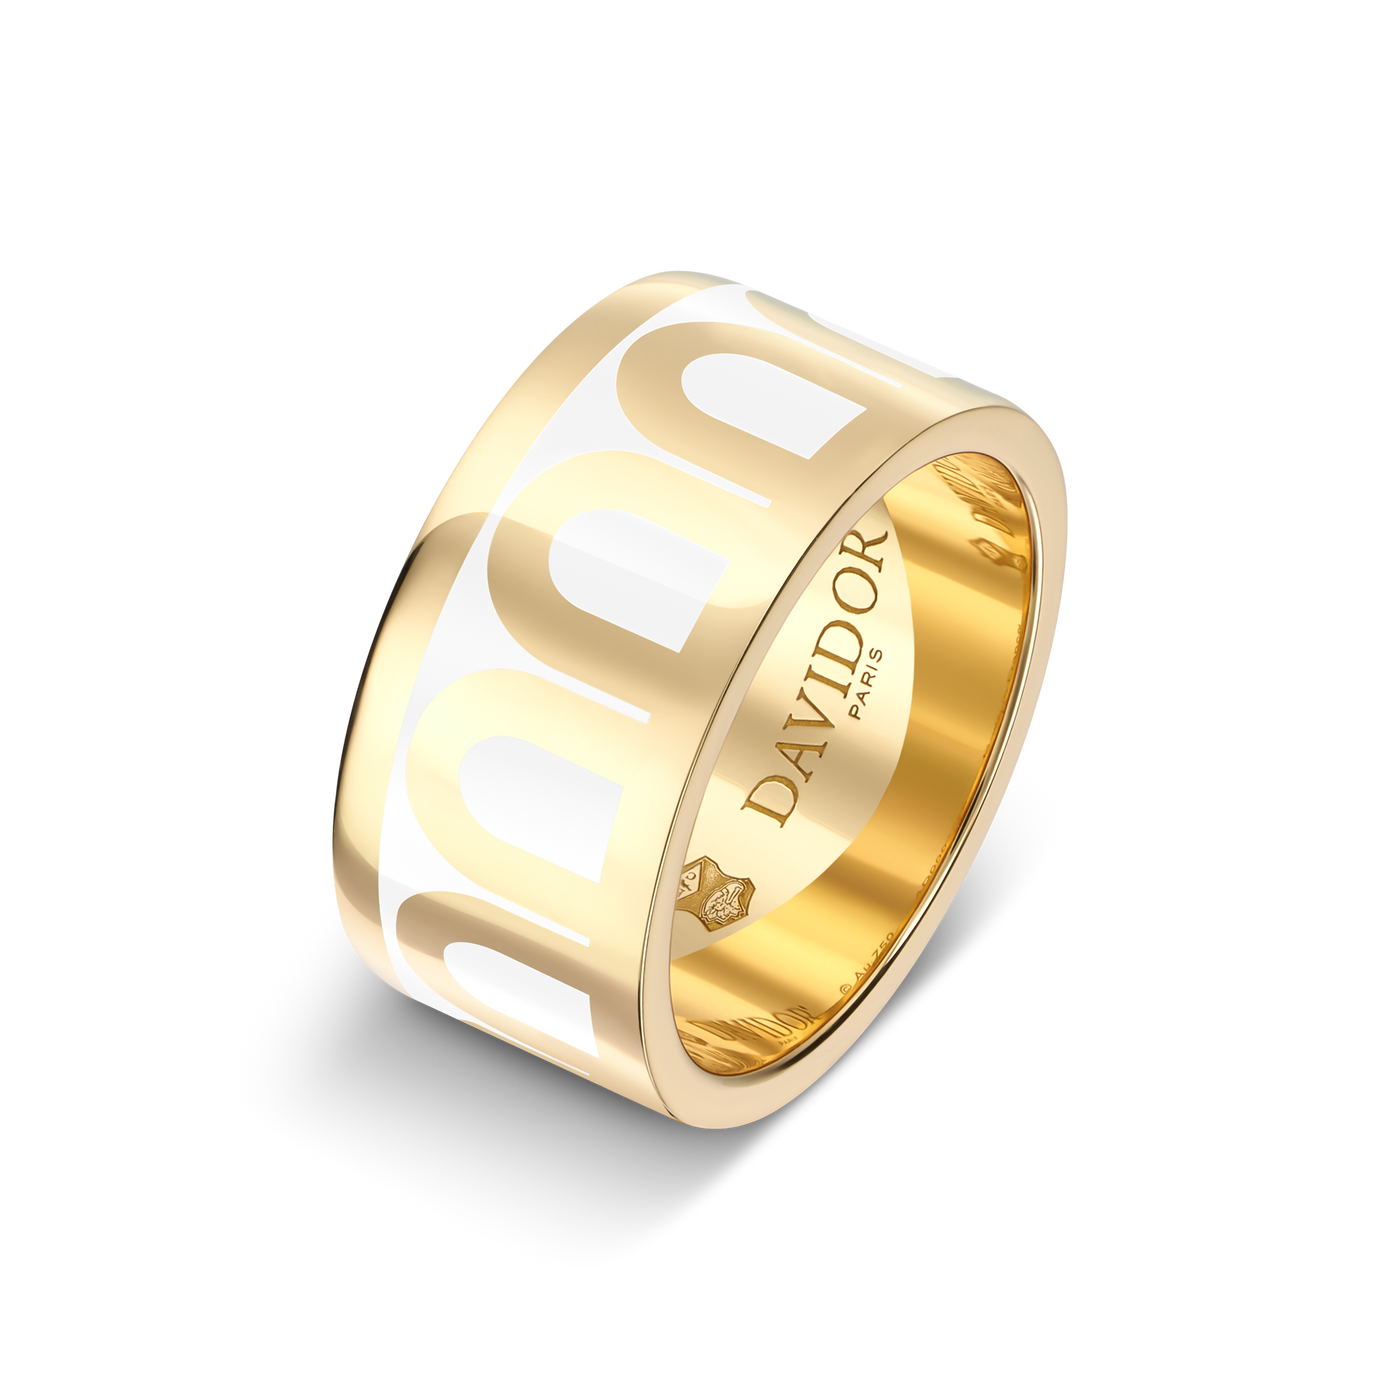 L'Arc de DAVIDOR Ring GM, 18k Yellow Gold with Neige Lacquered Ceramic - DAVIDOR